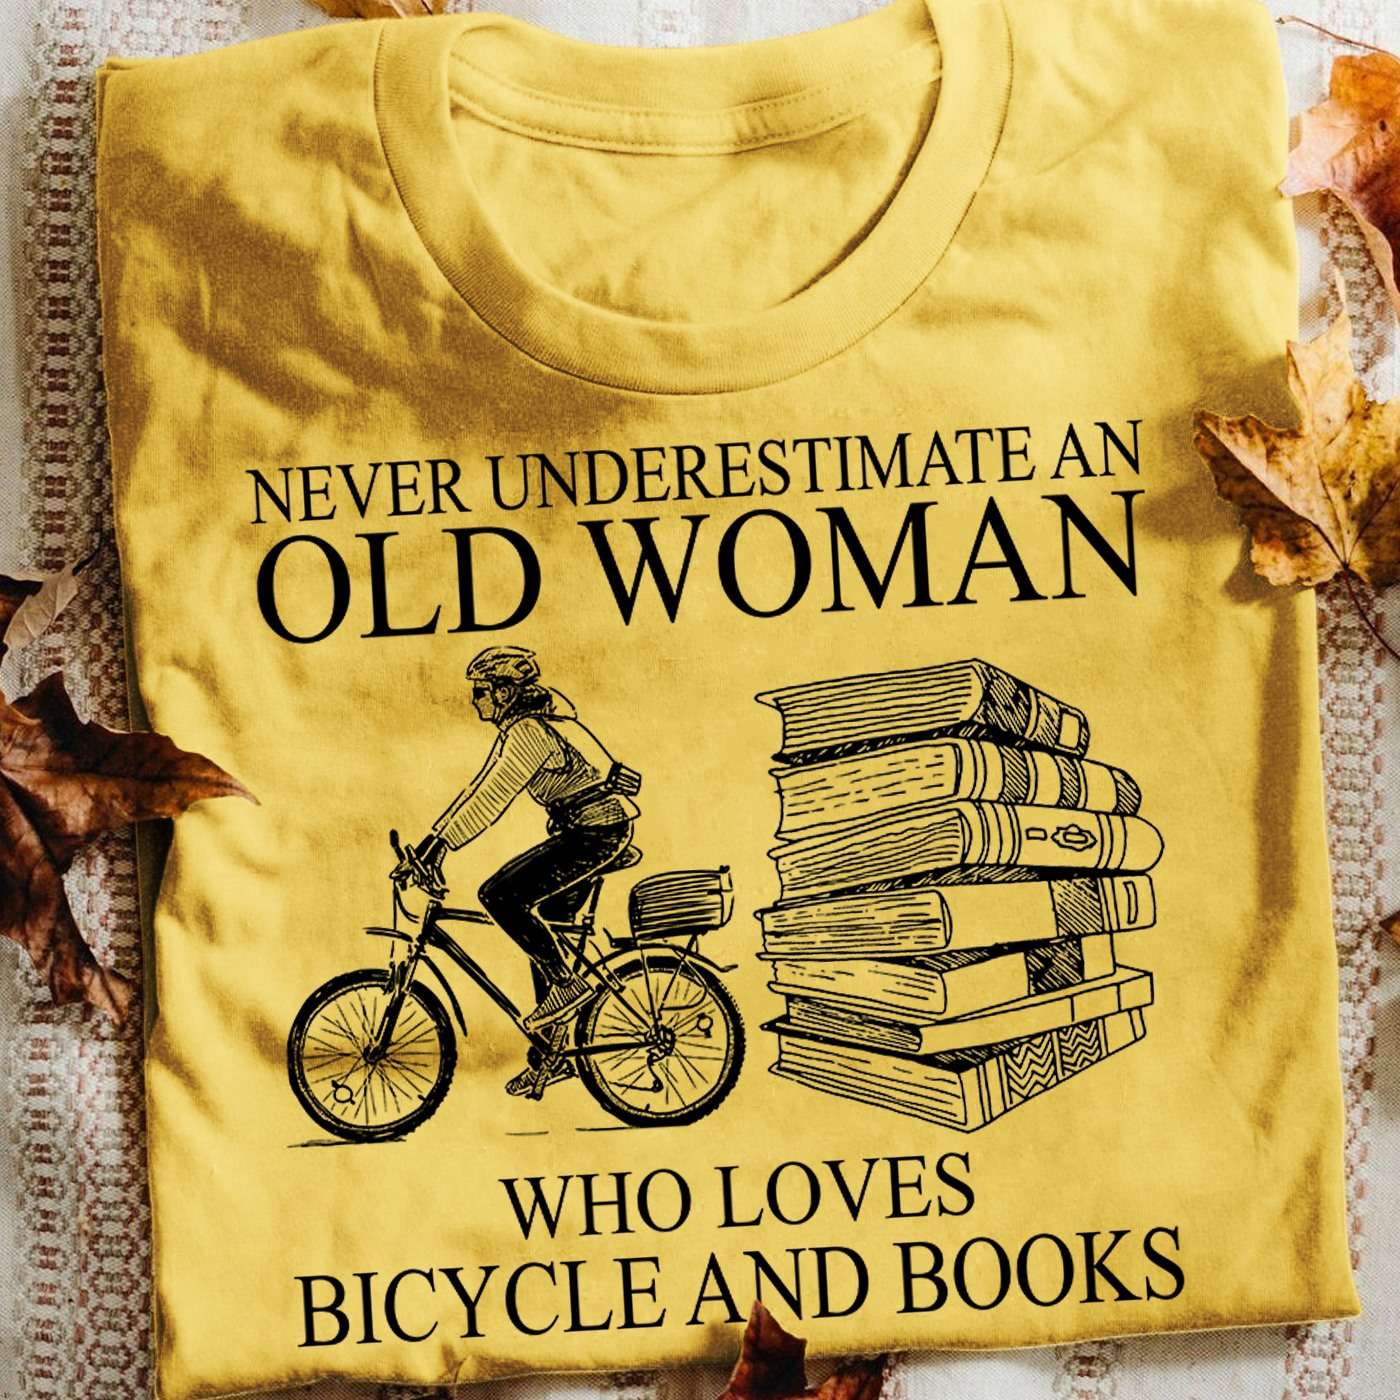 Never underestimate an old woman who loves bicycle and books - T-shirt for book lover